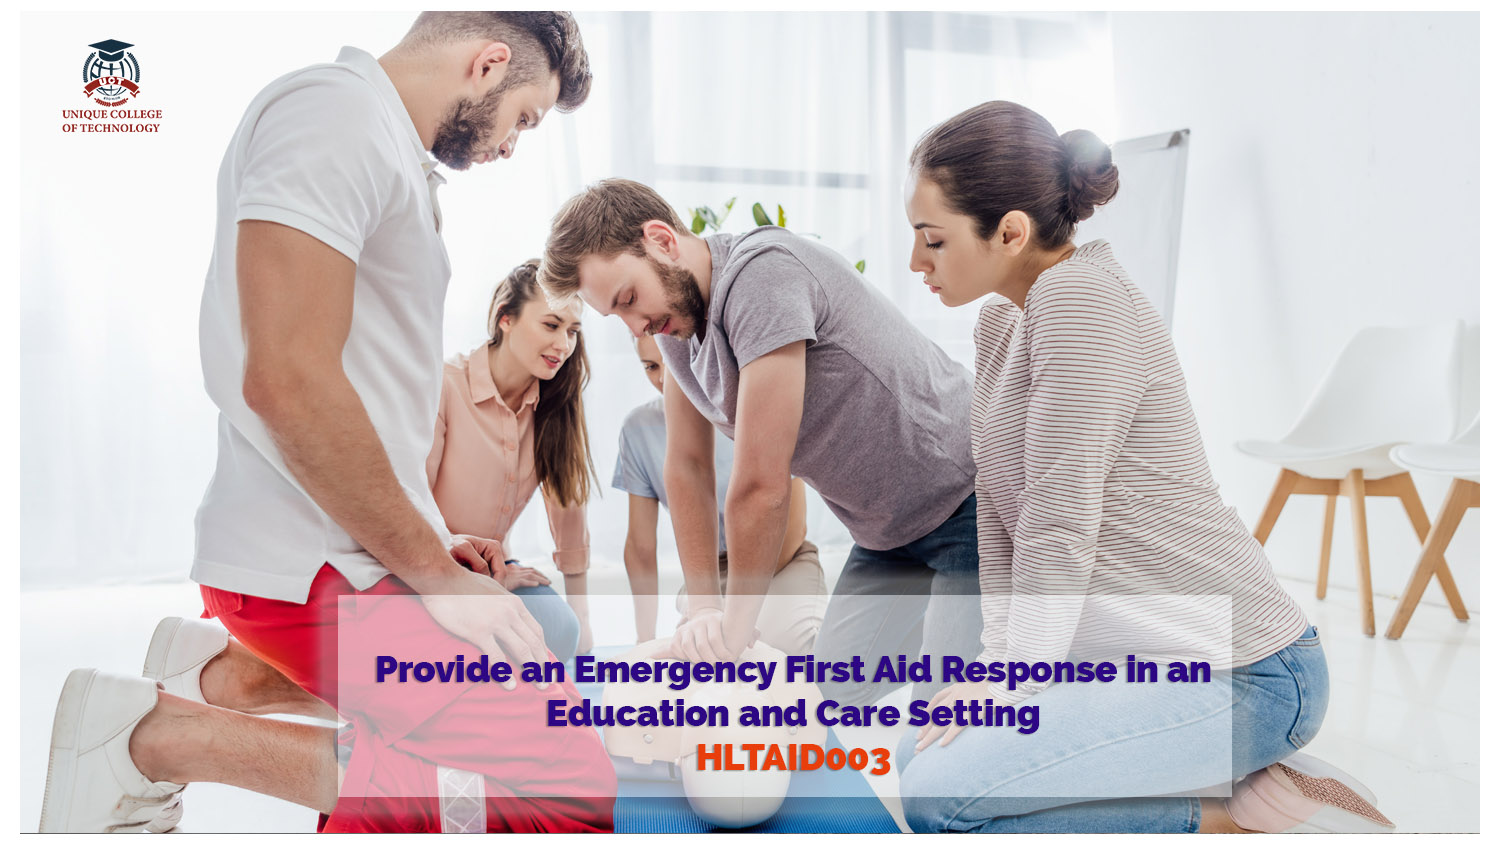 HLTAID004 – Provide an emergency first aid response in an education and care setting